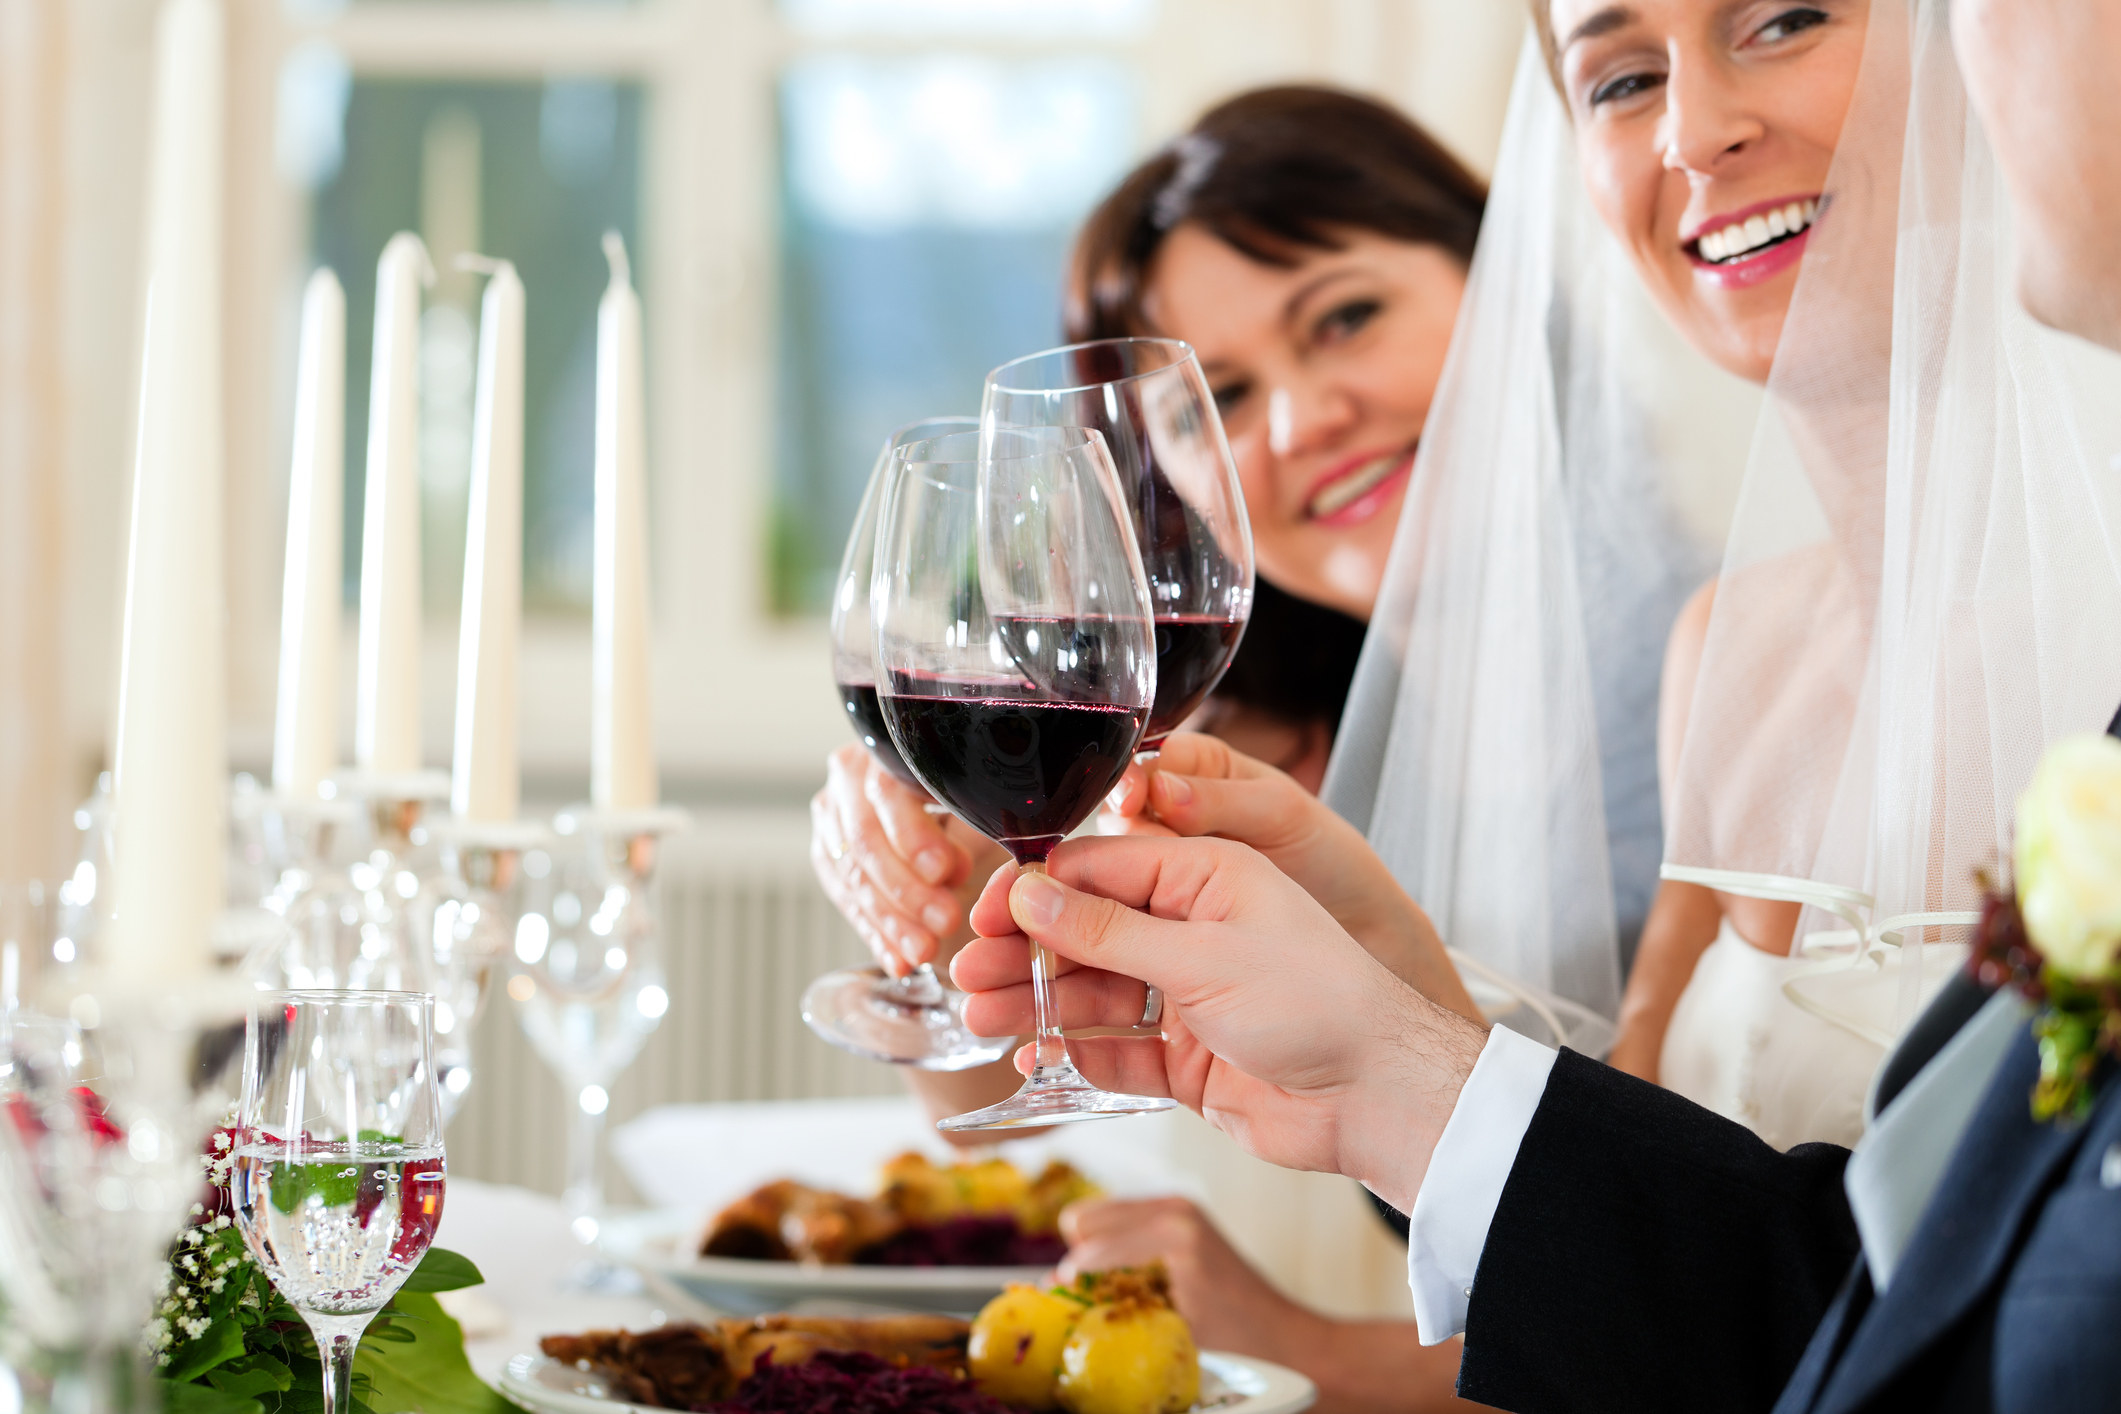 A bride and groom clinking wine glasses